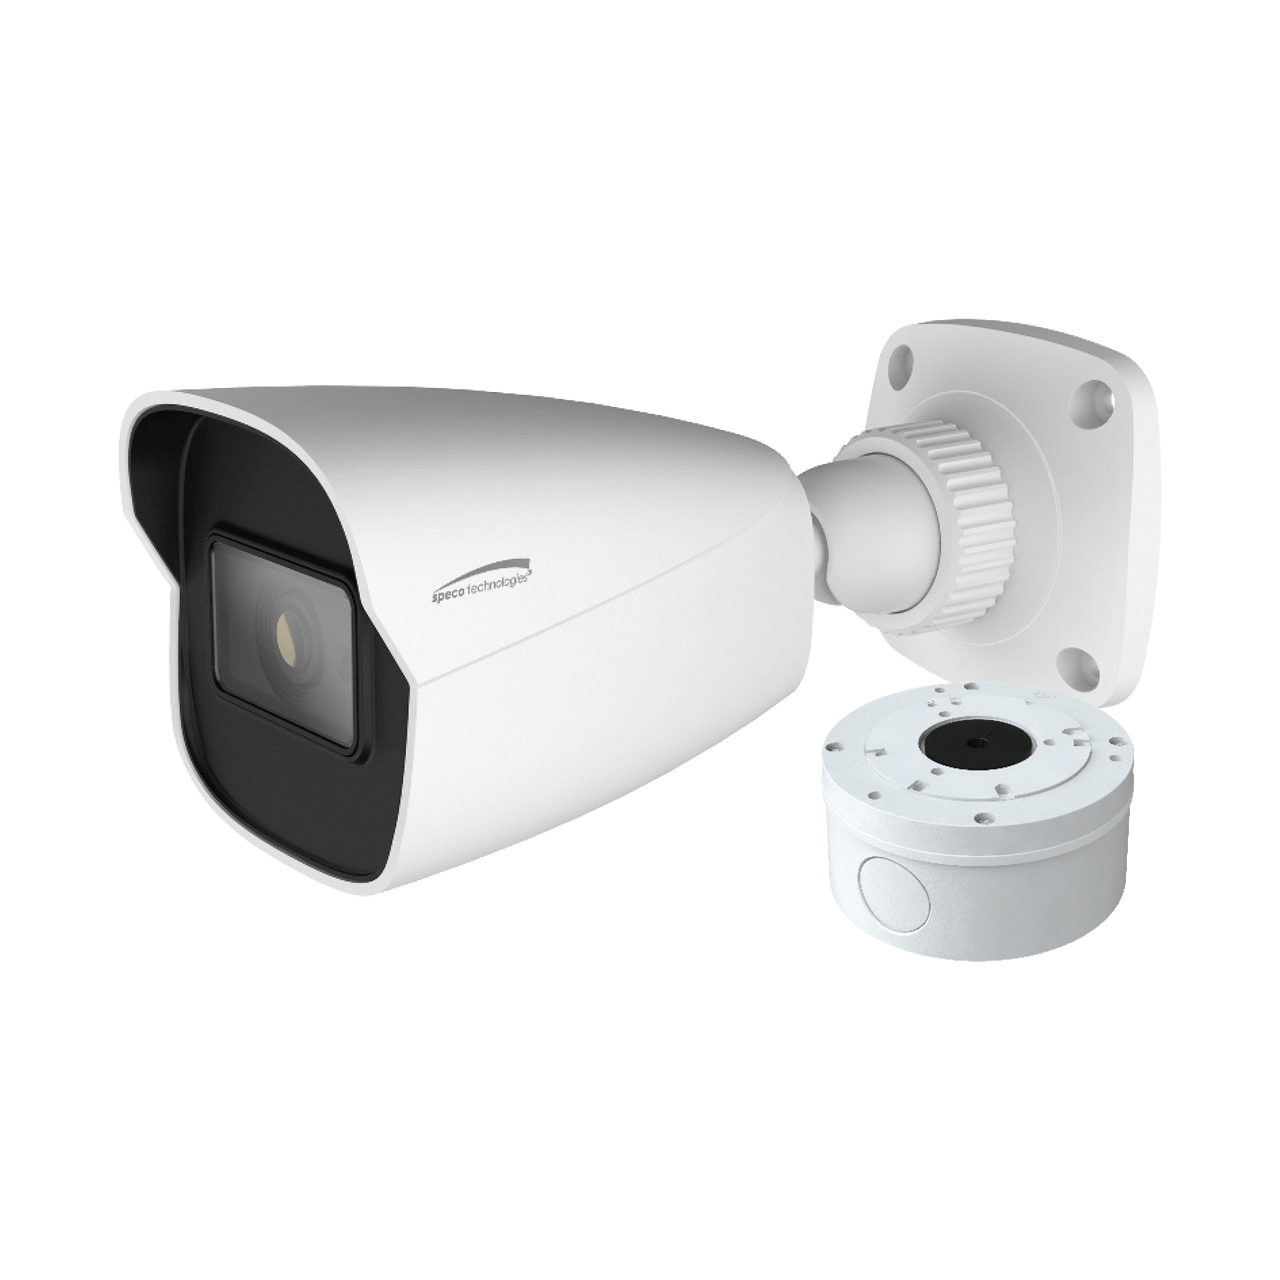 Speco Technologies O8VB1 8MP H.265 IP Bullet Camera with IR, 2.8mm fixed lens, Junction Box, White (SPE-O8VB1)